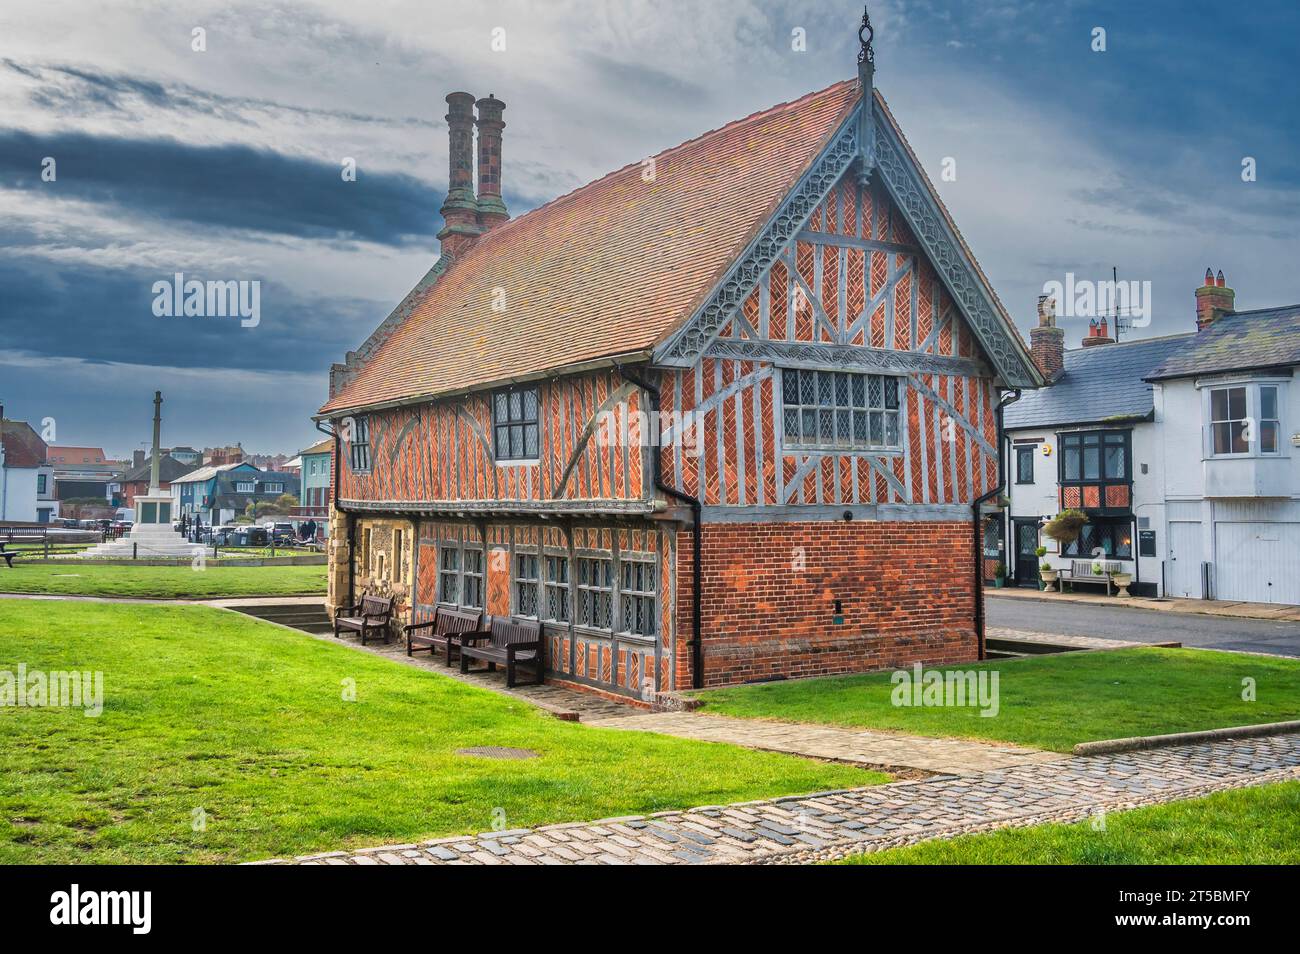 This medieval building is of Moot Hall located on the promenade of the Suffolk Heritage Coast and historical resort town of Aldeburgh, Stock Photo